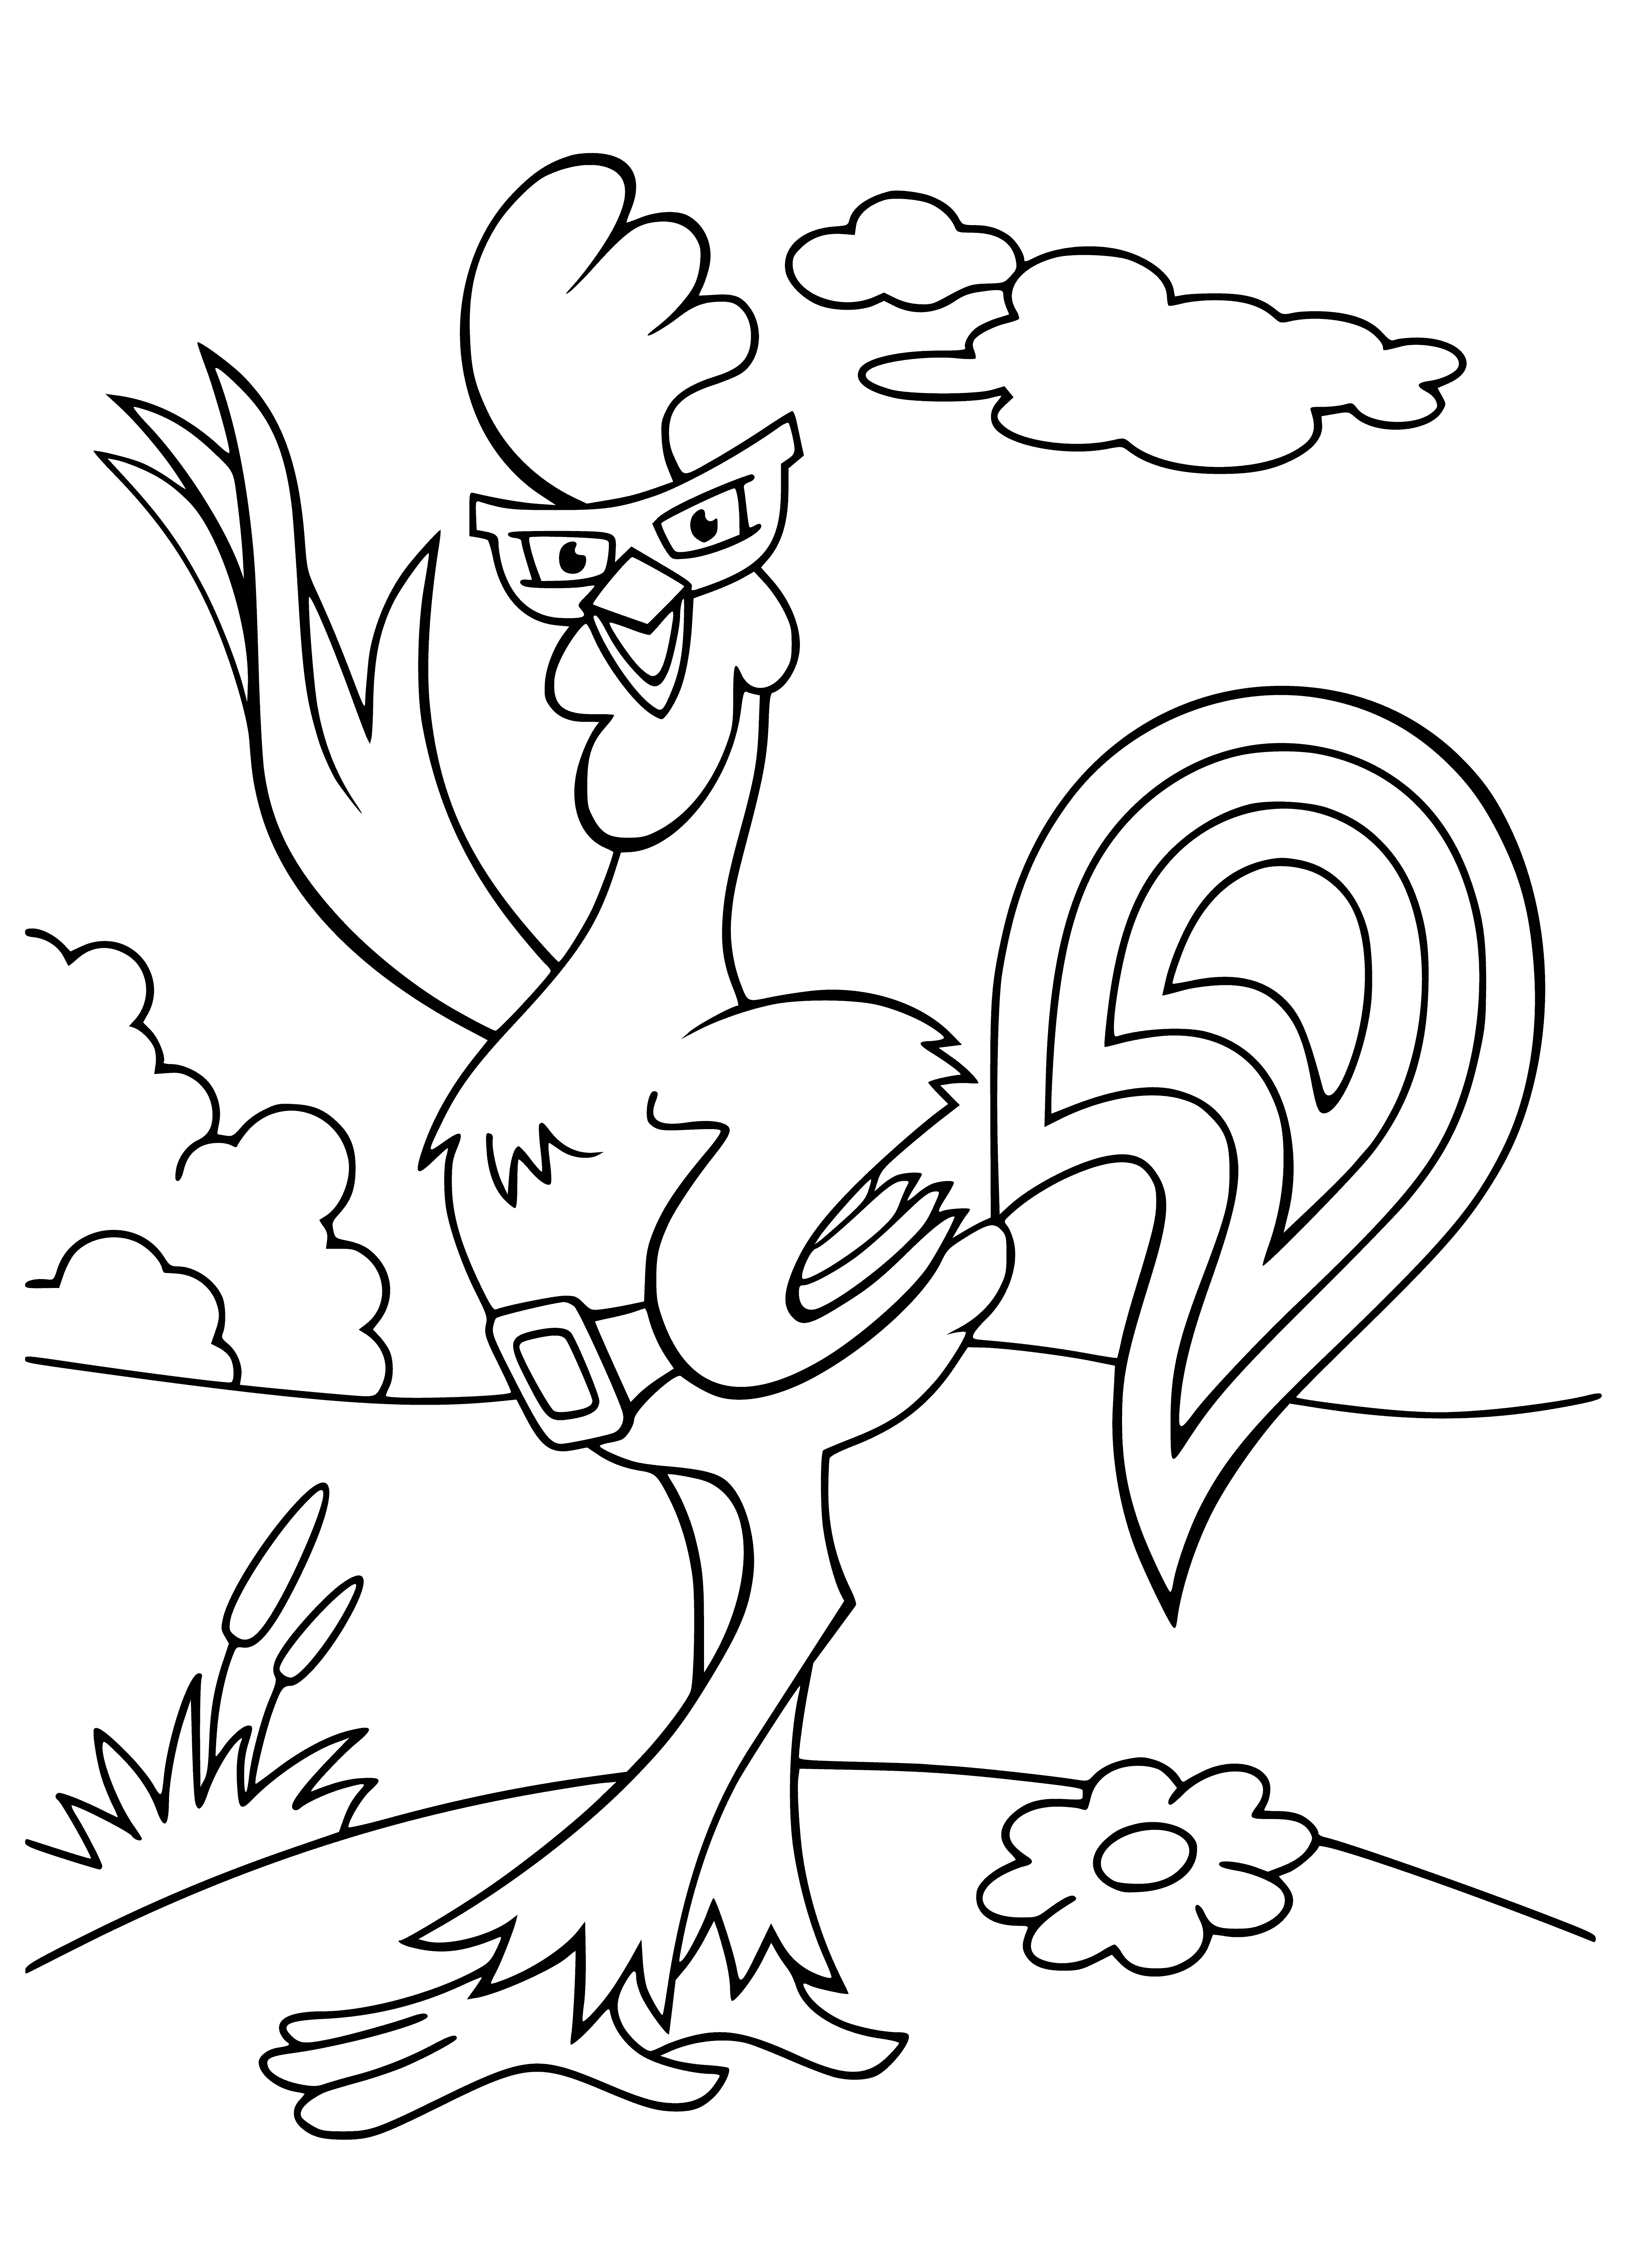 coloring page: Rooster on a fence post surveys town as if king, with deep black plumage, sharp claws and bright, piercing eyes.